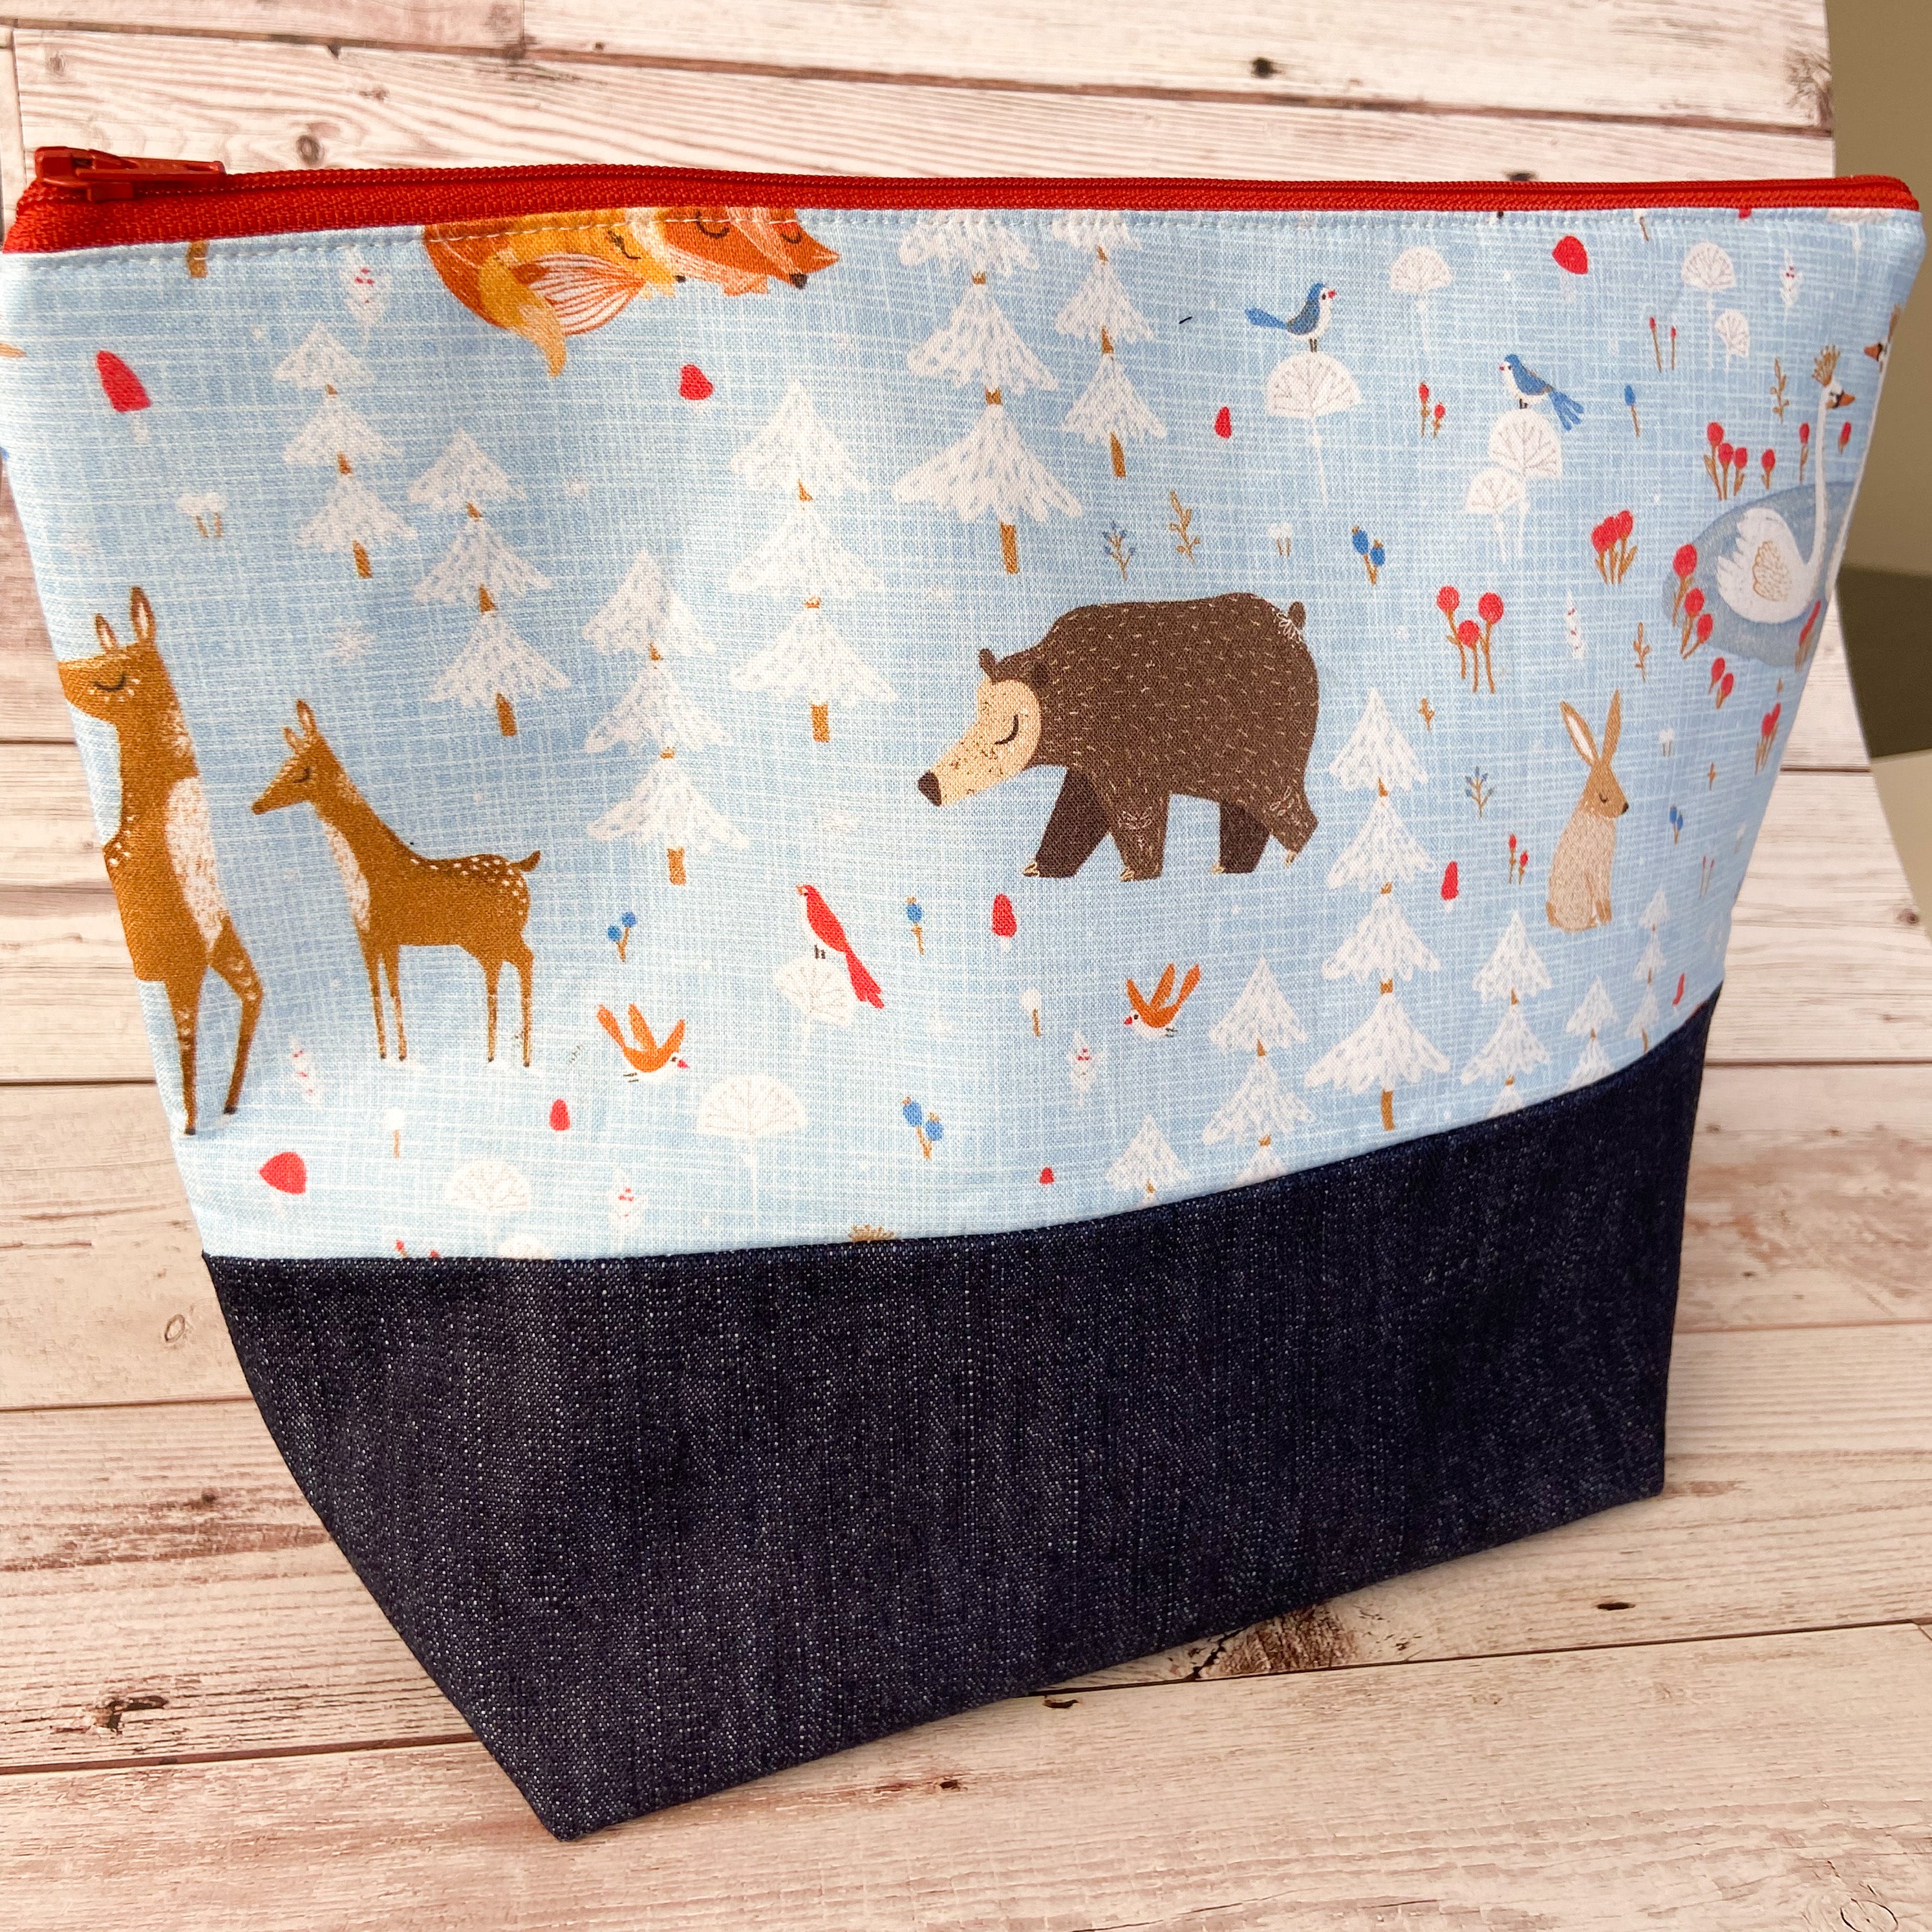 Denim - Large Zippered Project Bag - Winter Woodland Critters